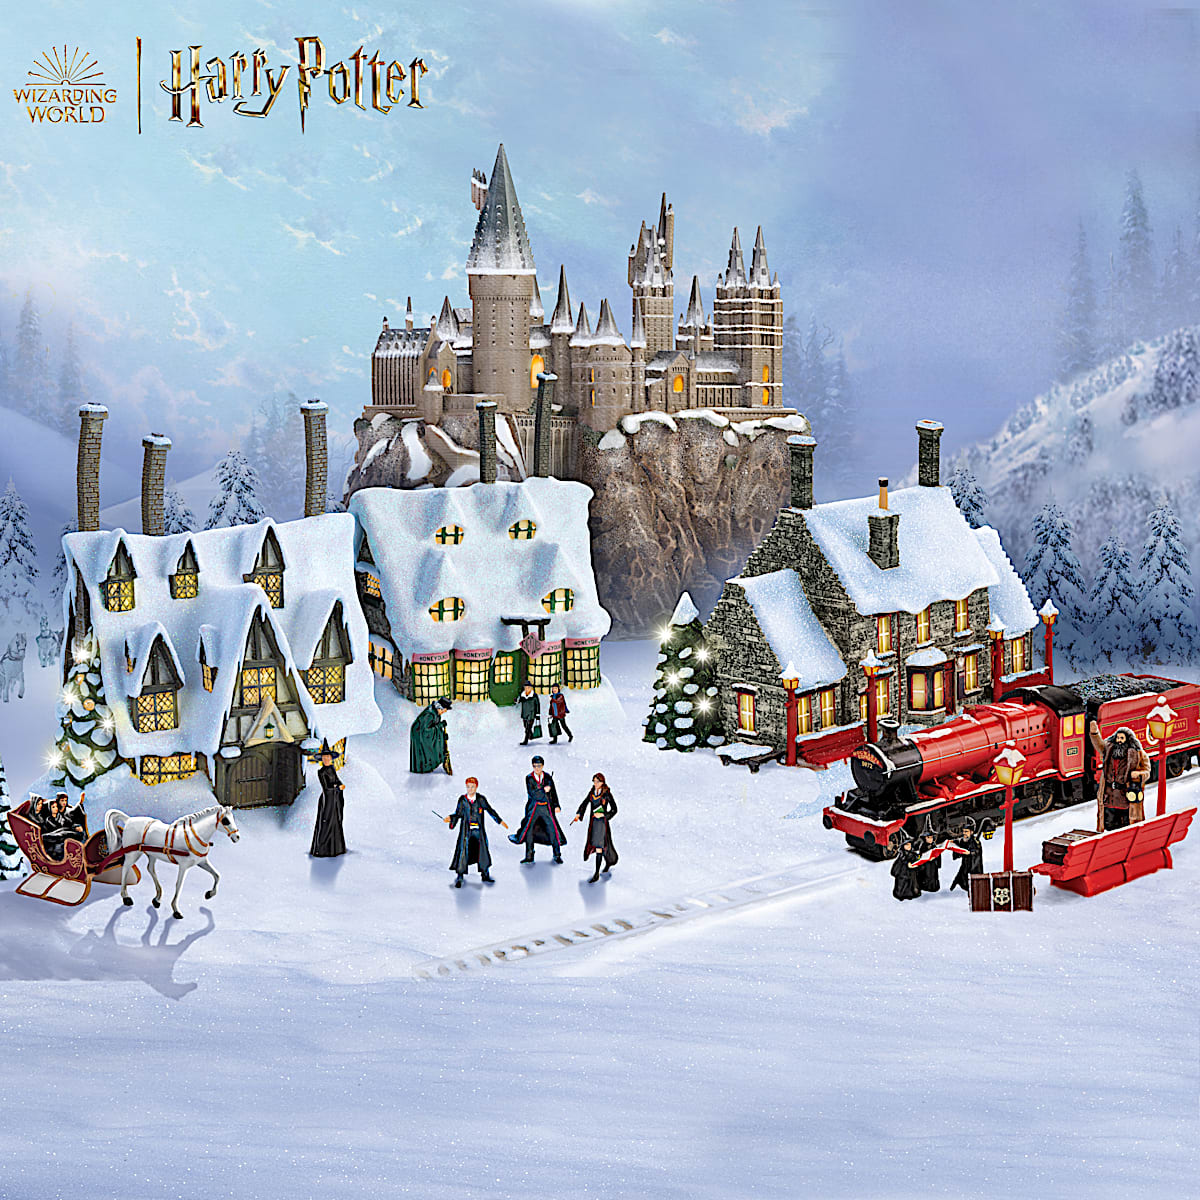 Harry Potter Collectibles & Gifts